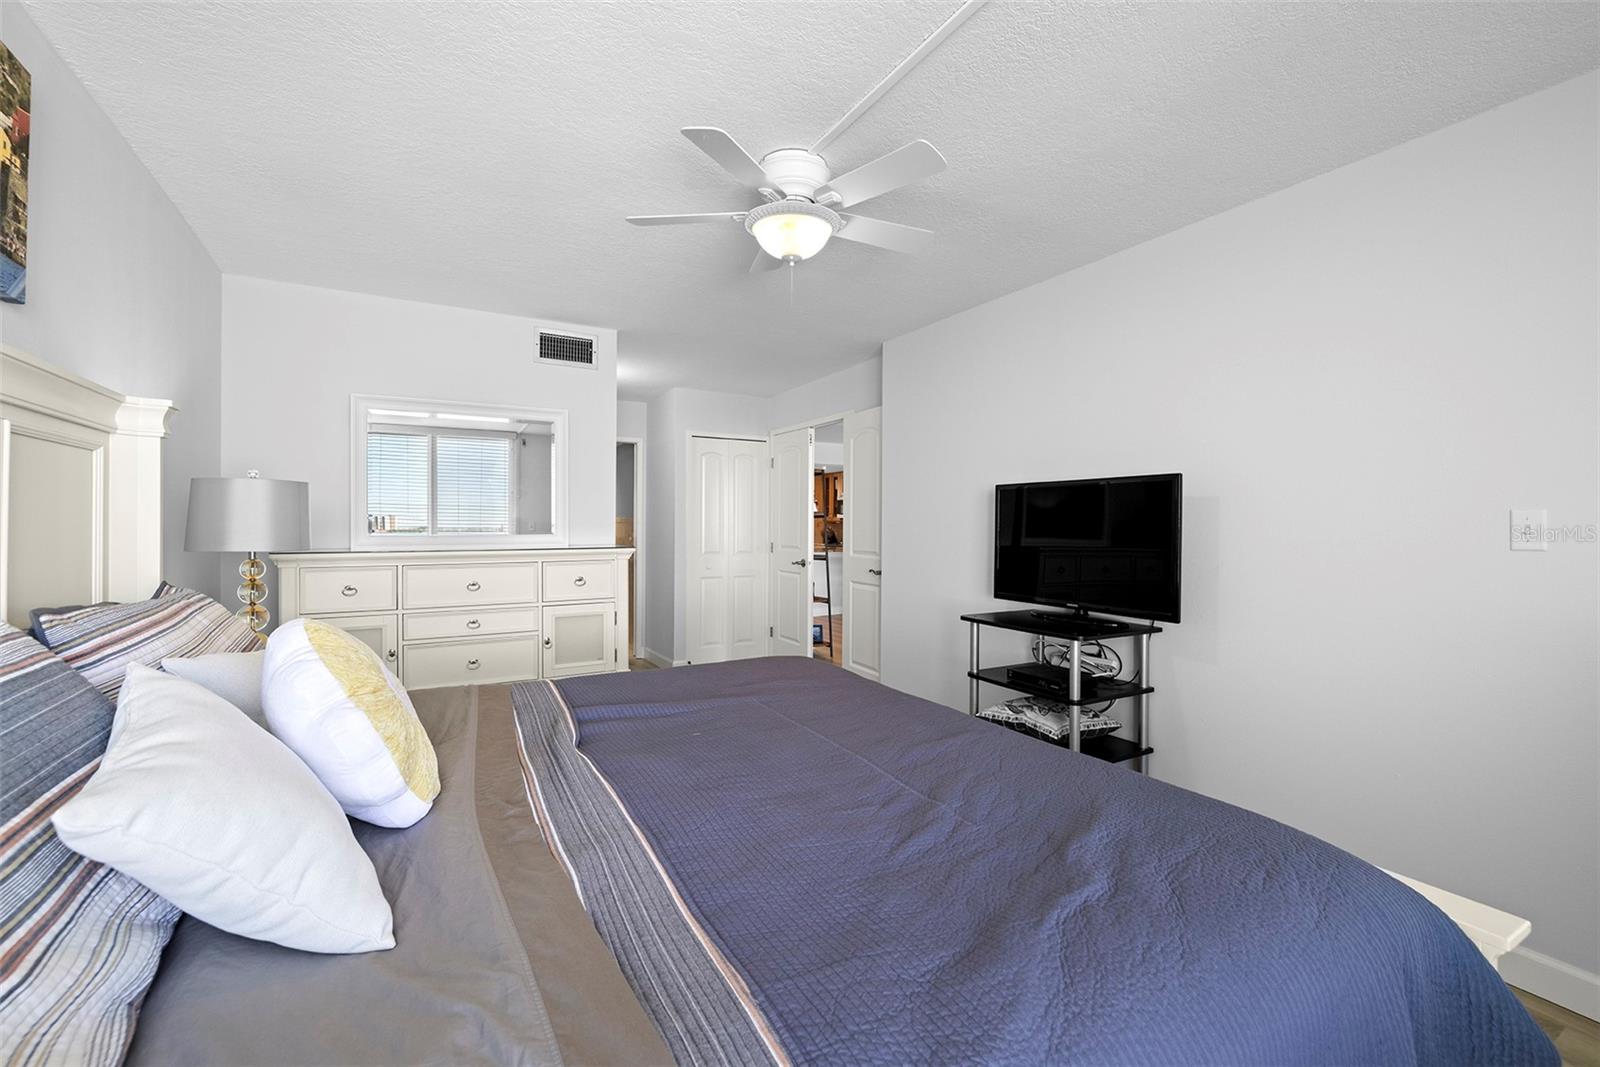 Ceiling fans in both bedrooms